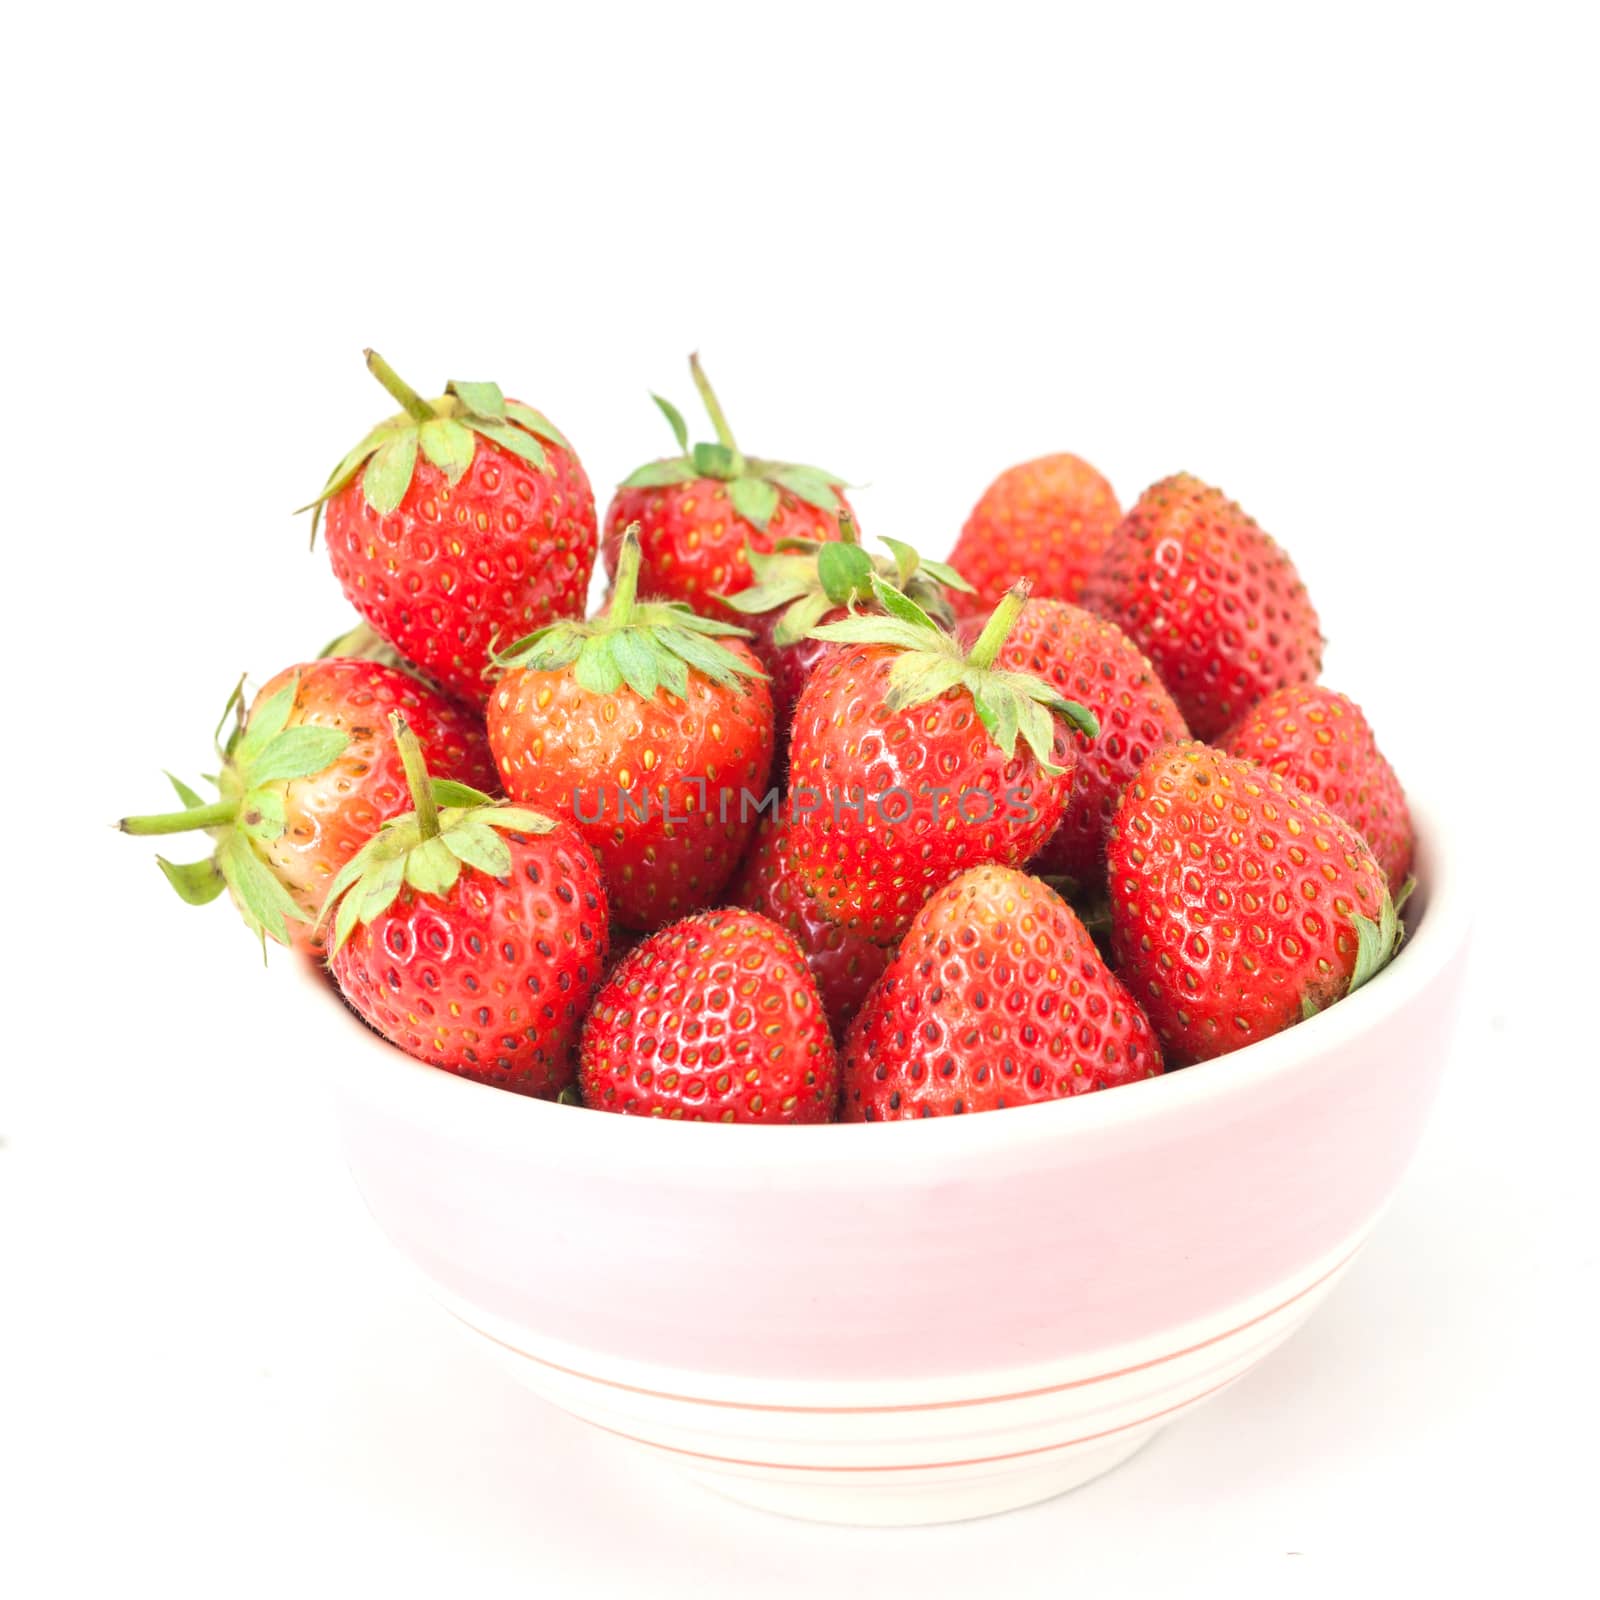 Small white bowl filled with succulent juicy fresh ripe red strawberries isolated on white